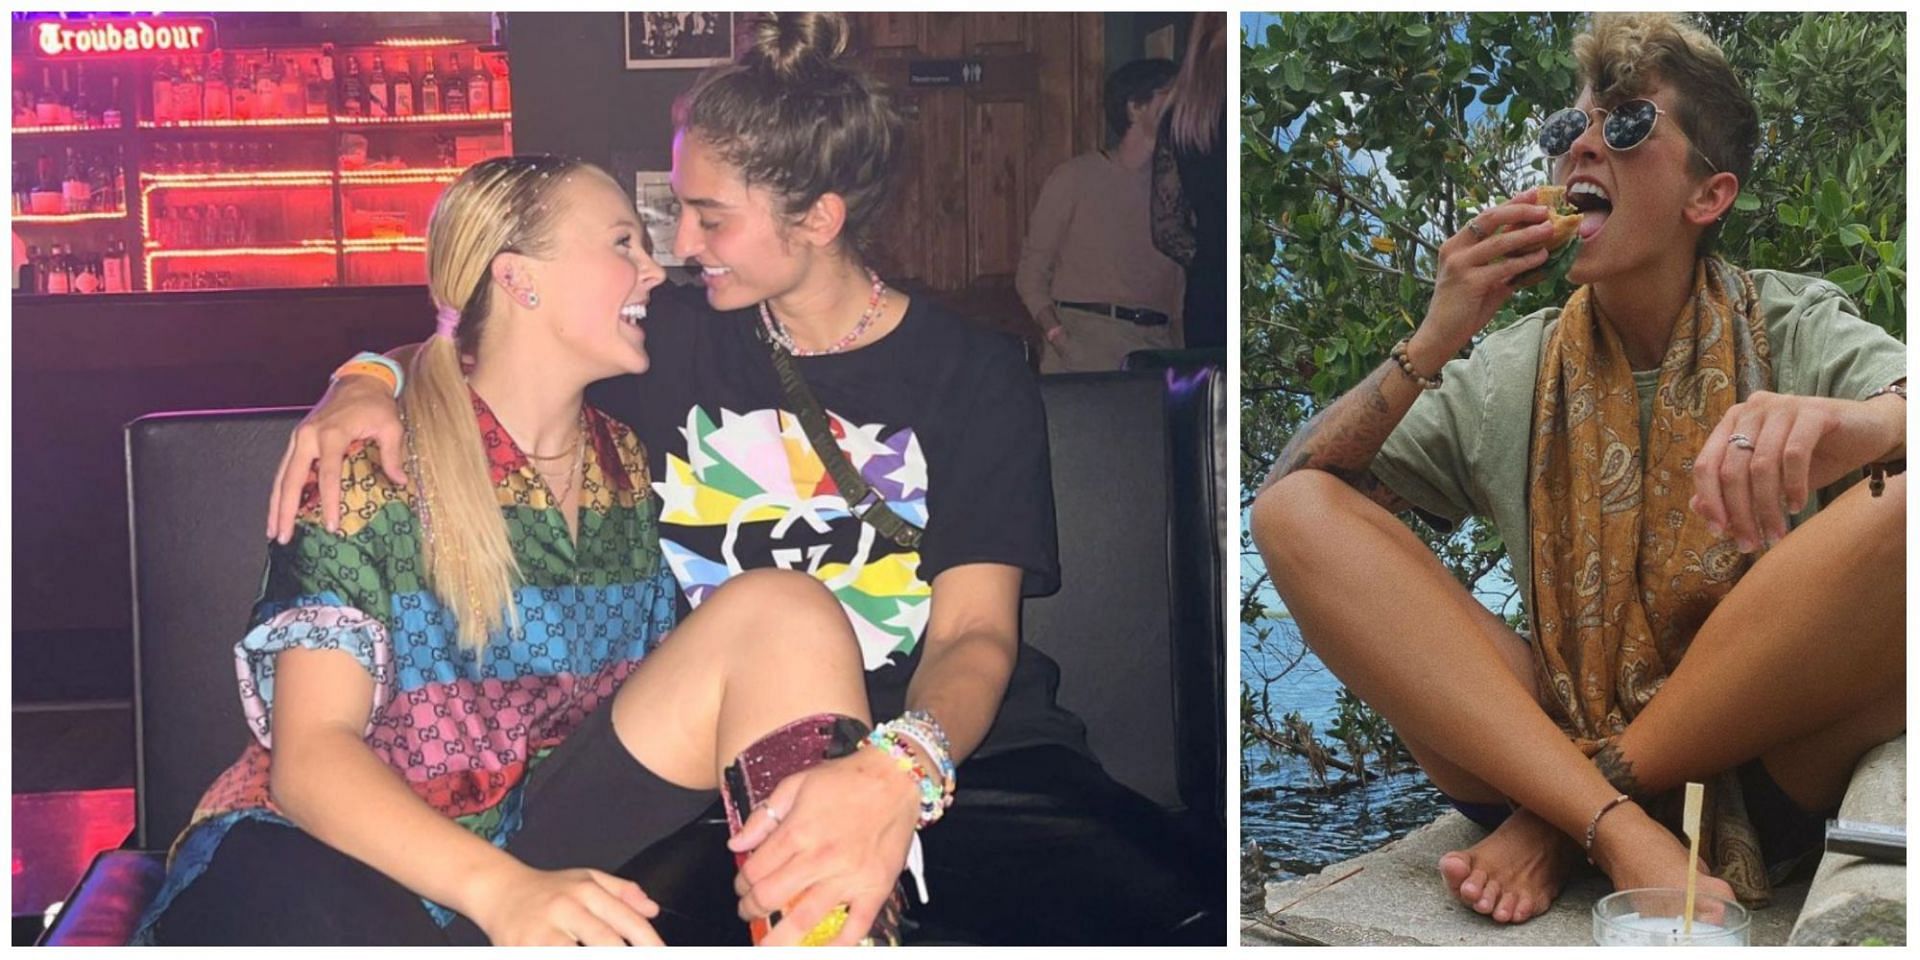 Did Avery Cyrus make out with Lundy? Details explored as netizens accuse the former of cheating. (Image via Instagram)